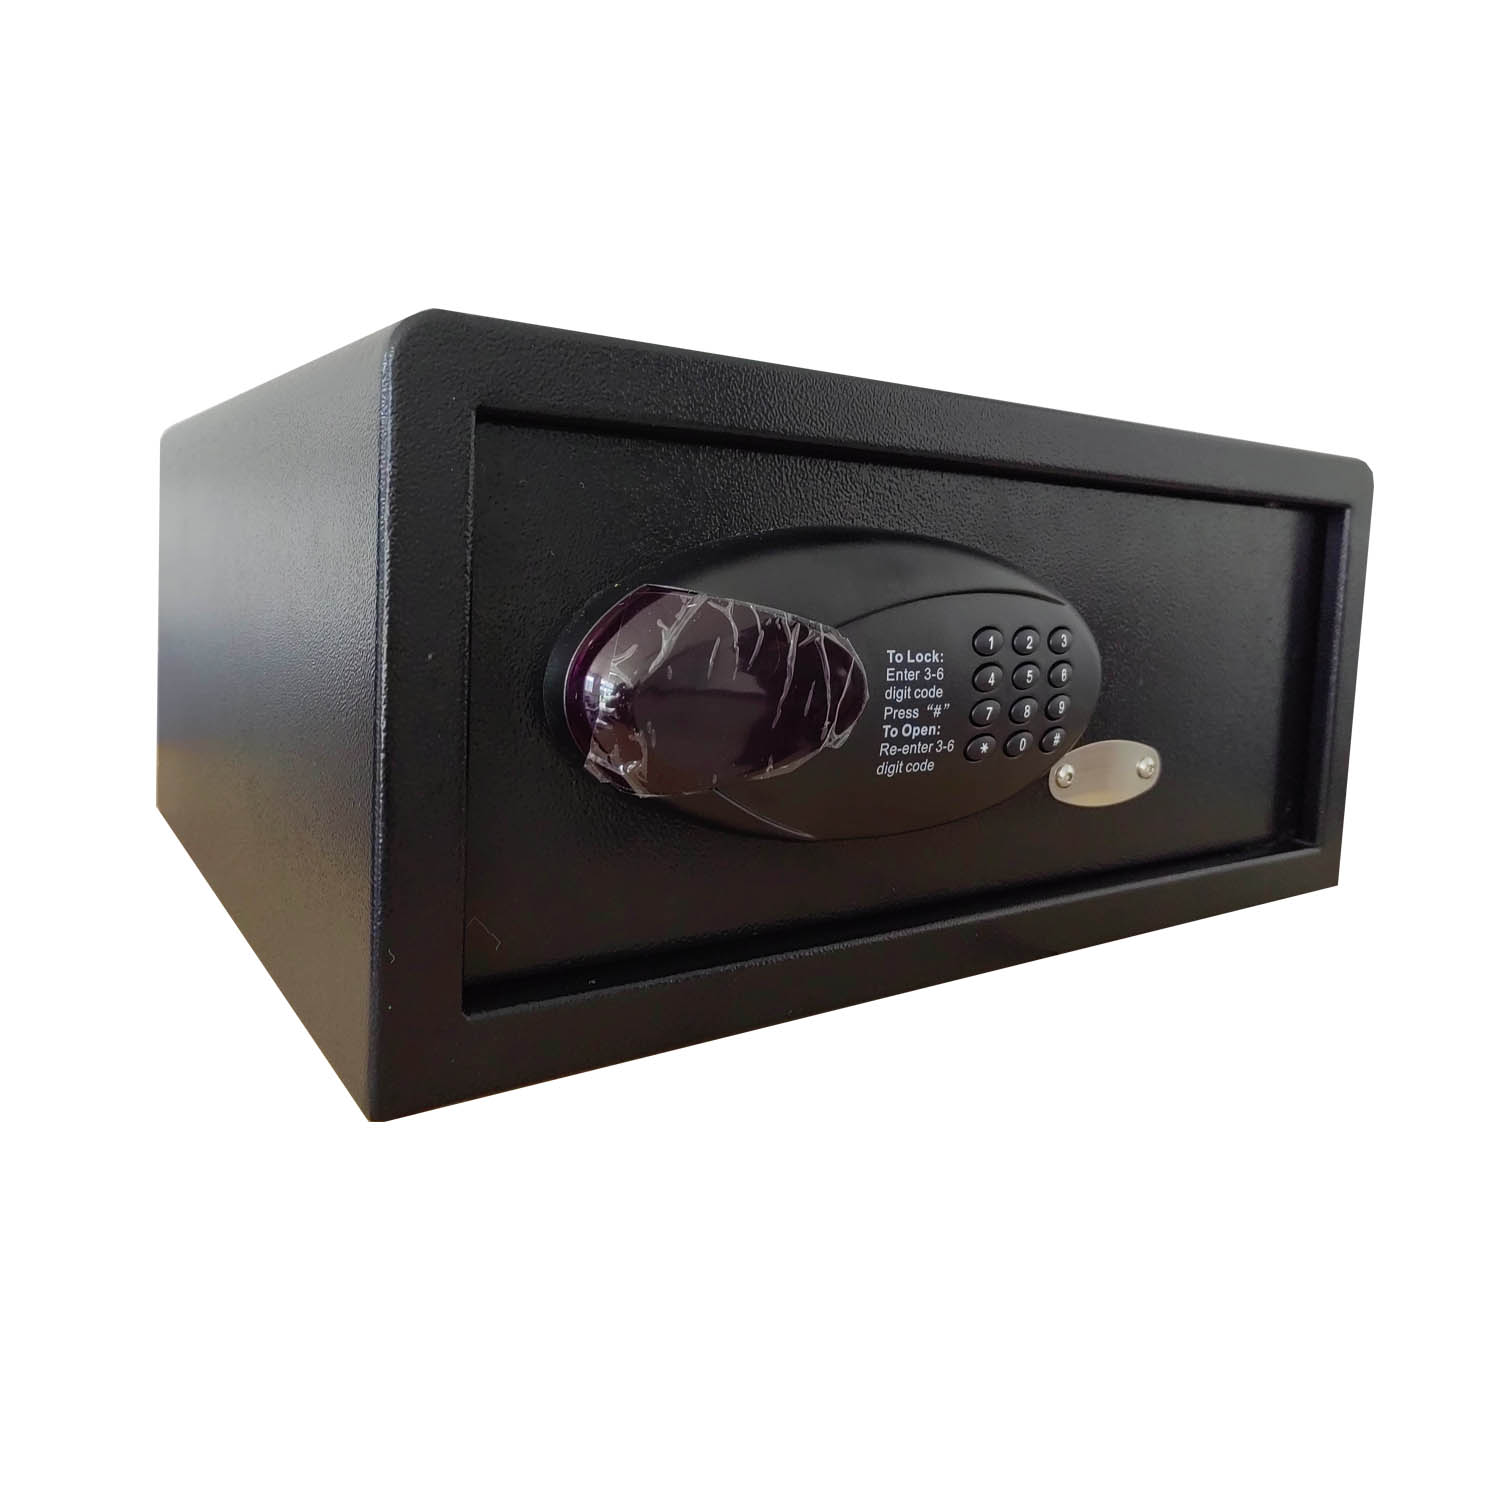 OEM High Quality Electric Hotel Safe Lockers Manufacturers –  Hotel Safe Home Safe Personal Document Safe Steel Security Safe Box Hotel-Style 195SHF – Mingyou